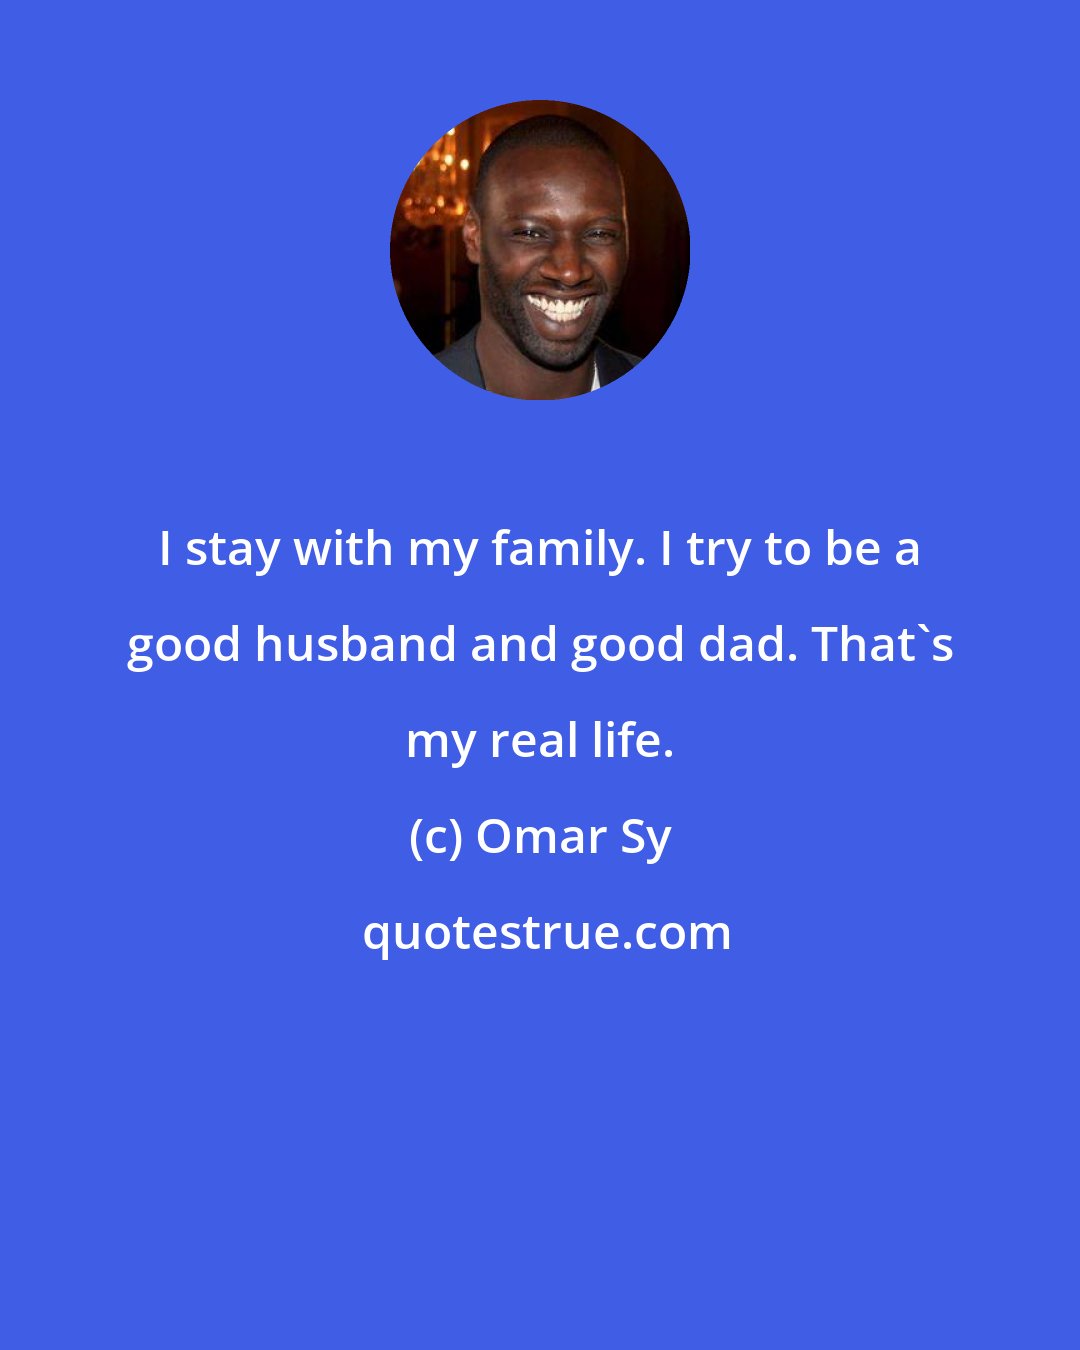 Omar Sy: I stay with my family. I try to be a good husband and good dad. That's my real life.